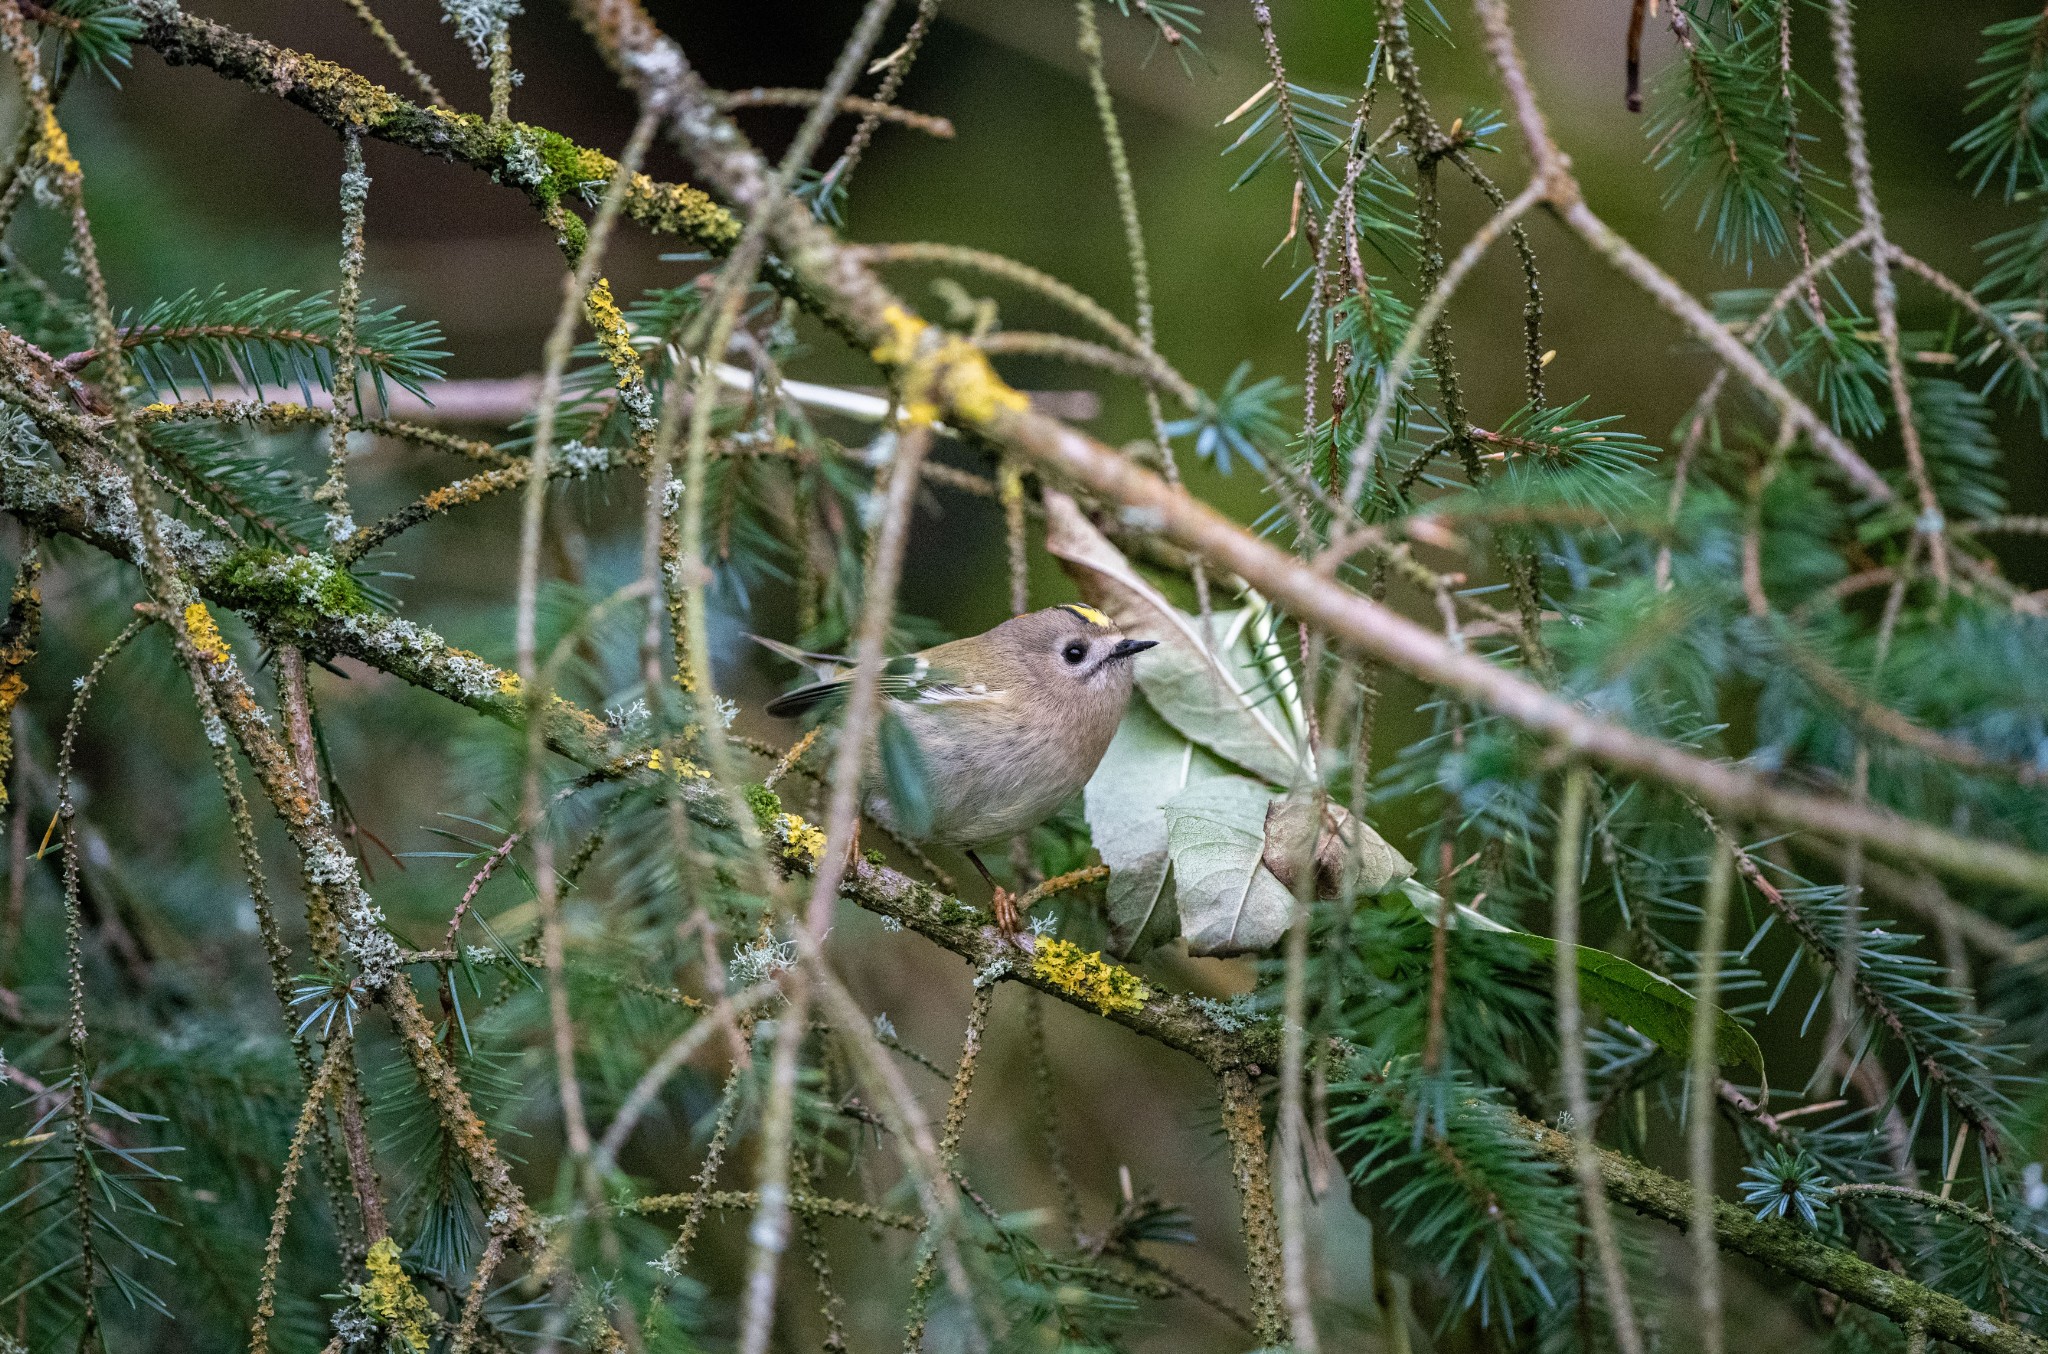 Goldcrest in Orkney - image by Raymond Besant